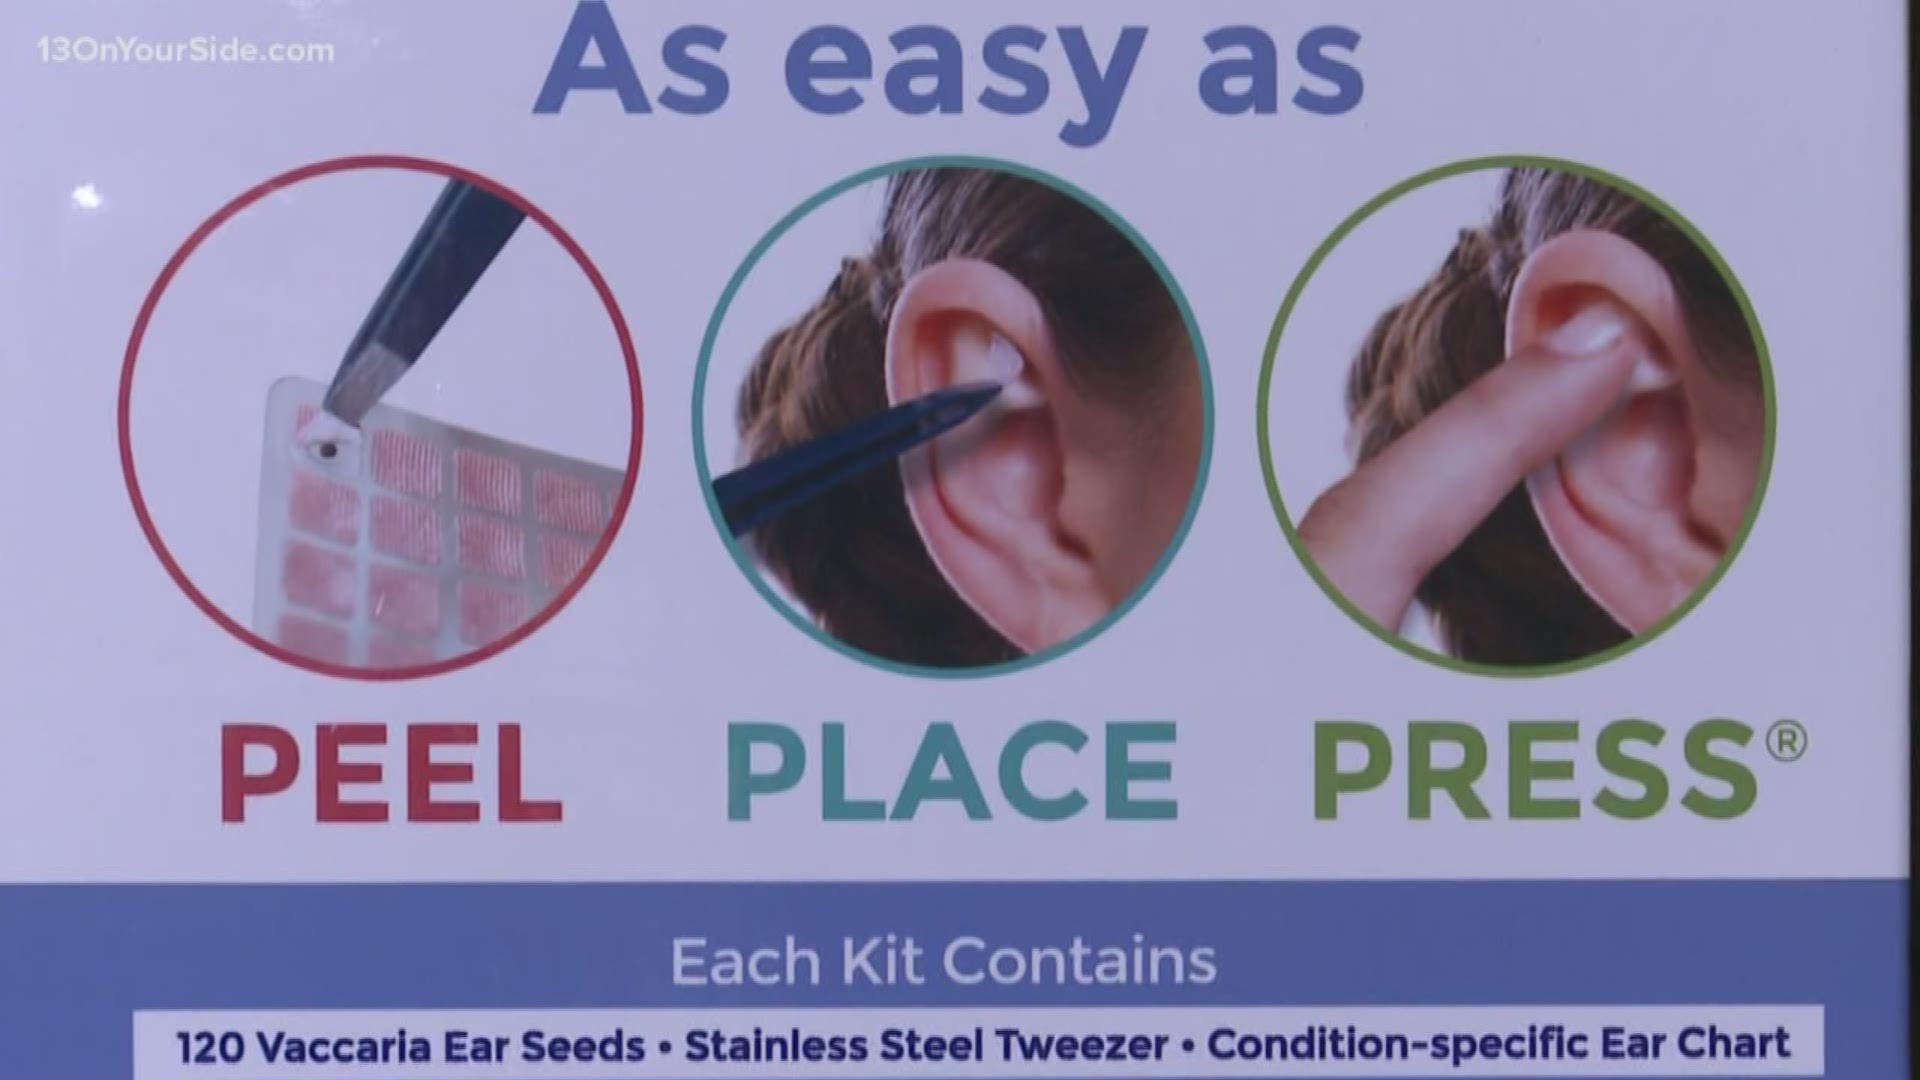 Despite its ancient history dating back to 500 BC ear seeds are becoming trendy again. They're small seeds used to stimulate pressure points in your ear.